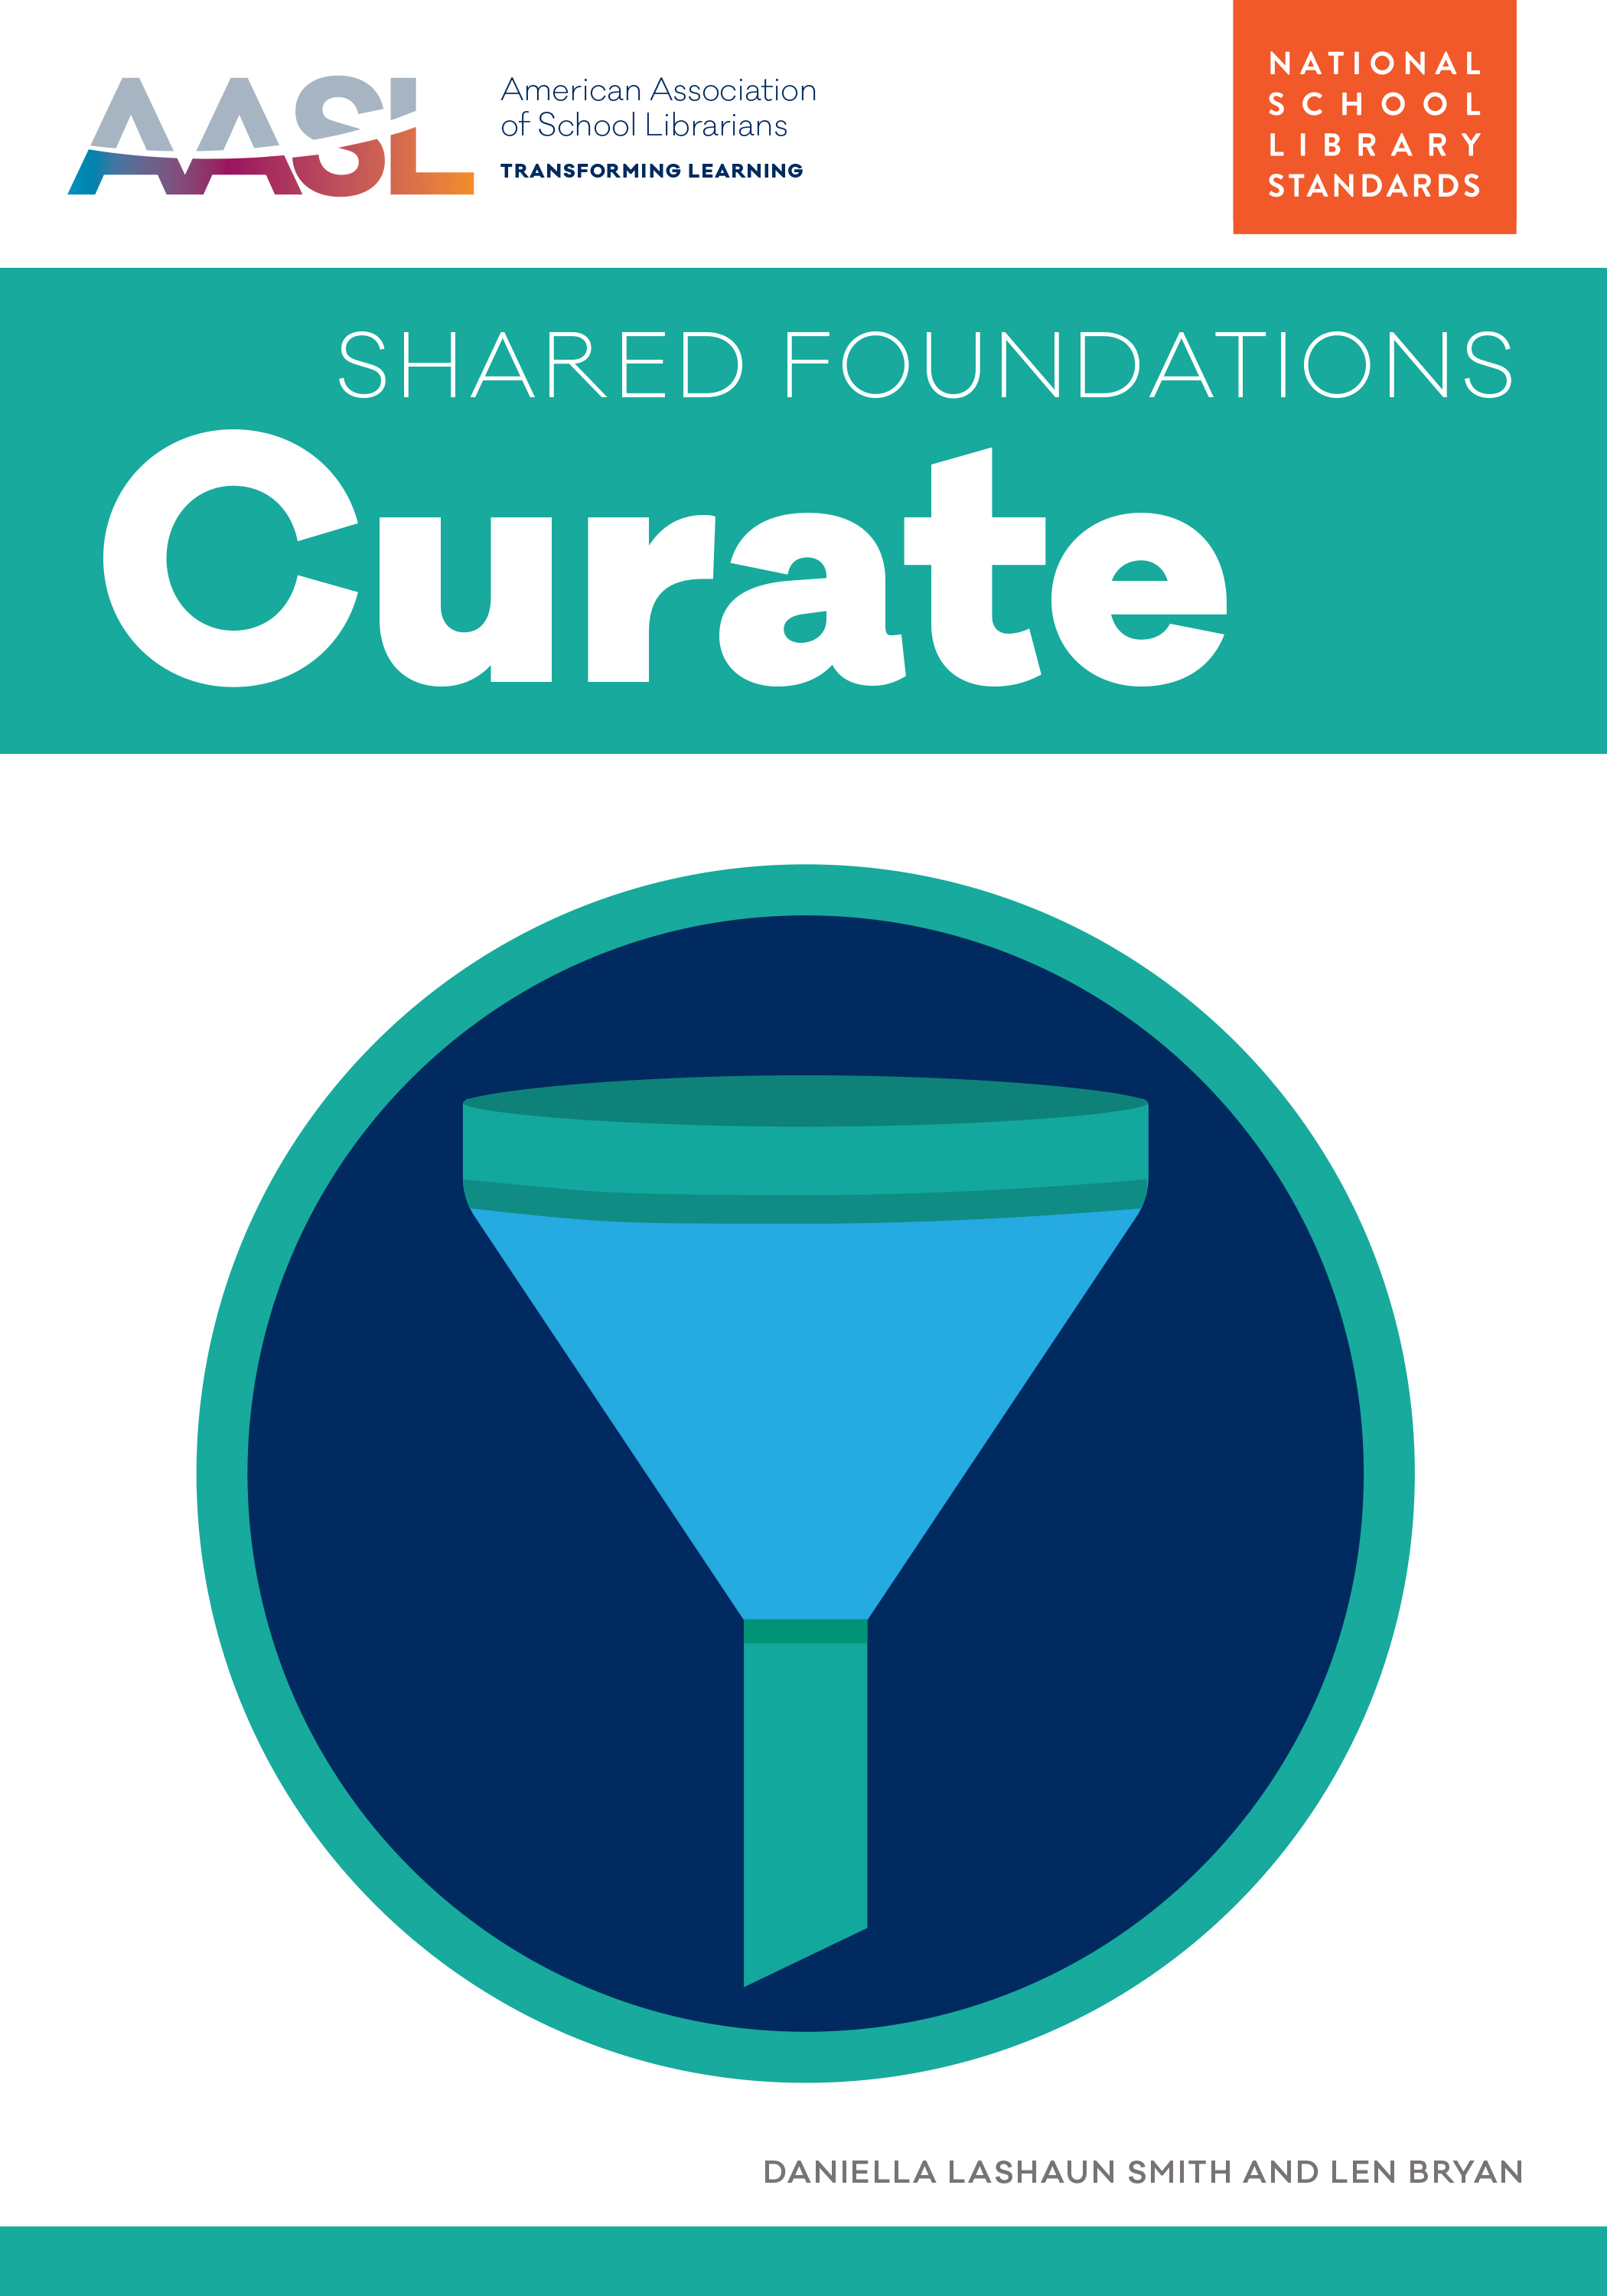 book cover for Curate (Shared Foundations Series)